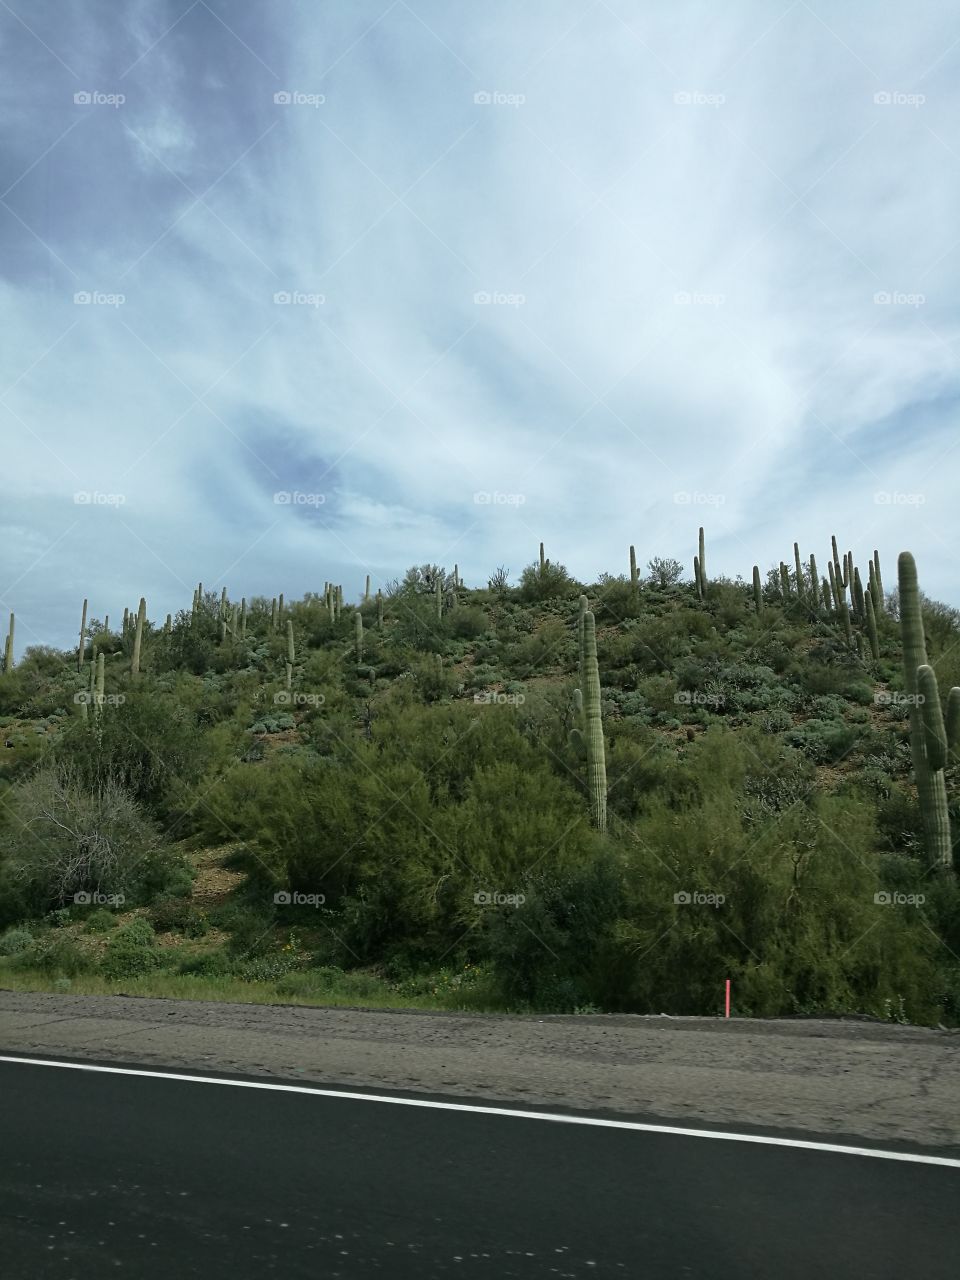 Cactus trees on mountain with background of cloudy sky